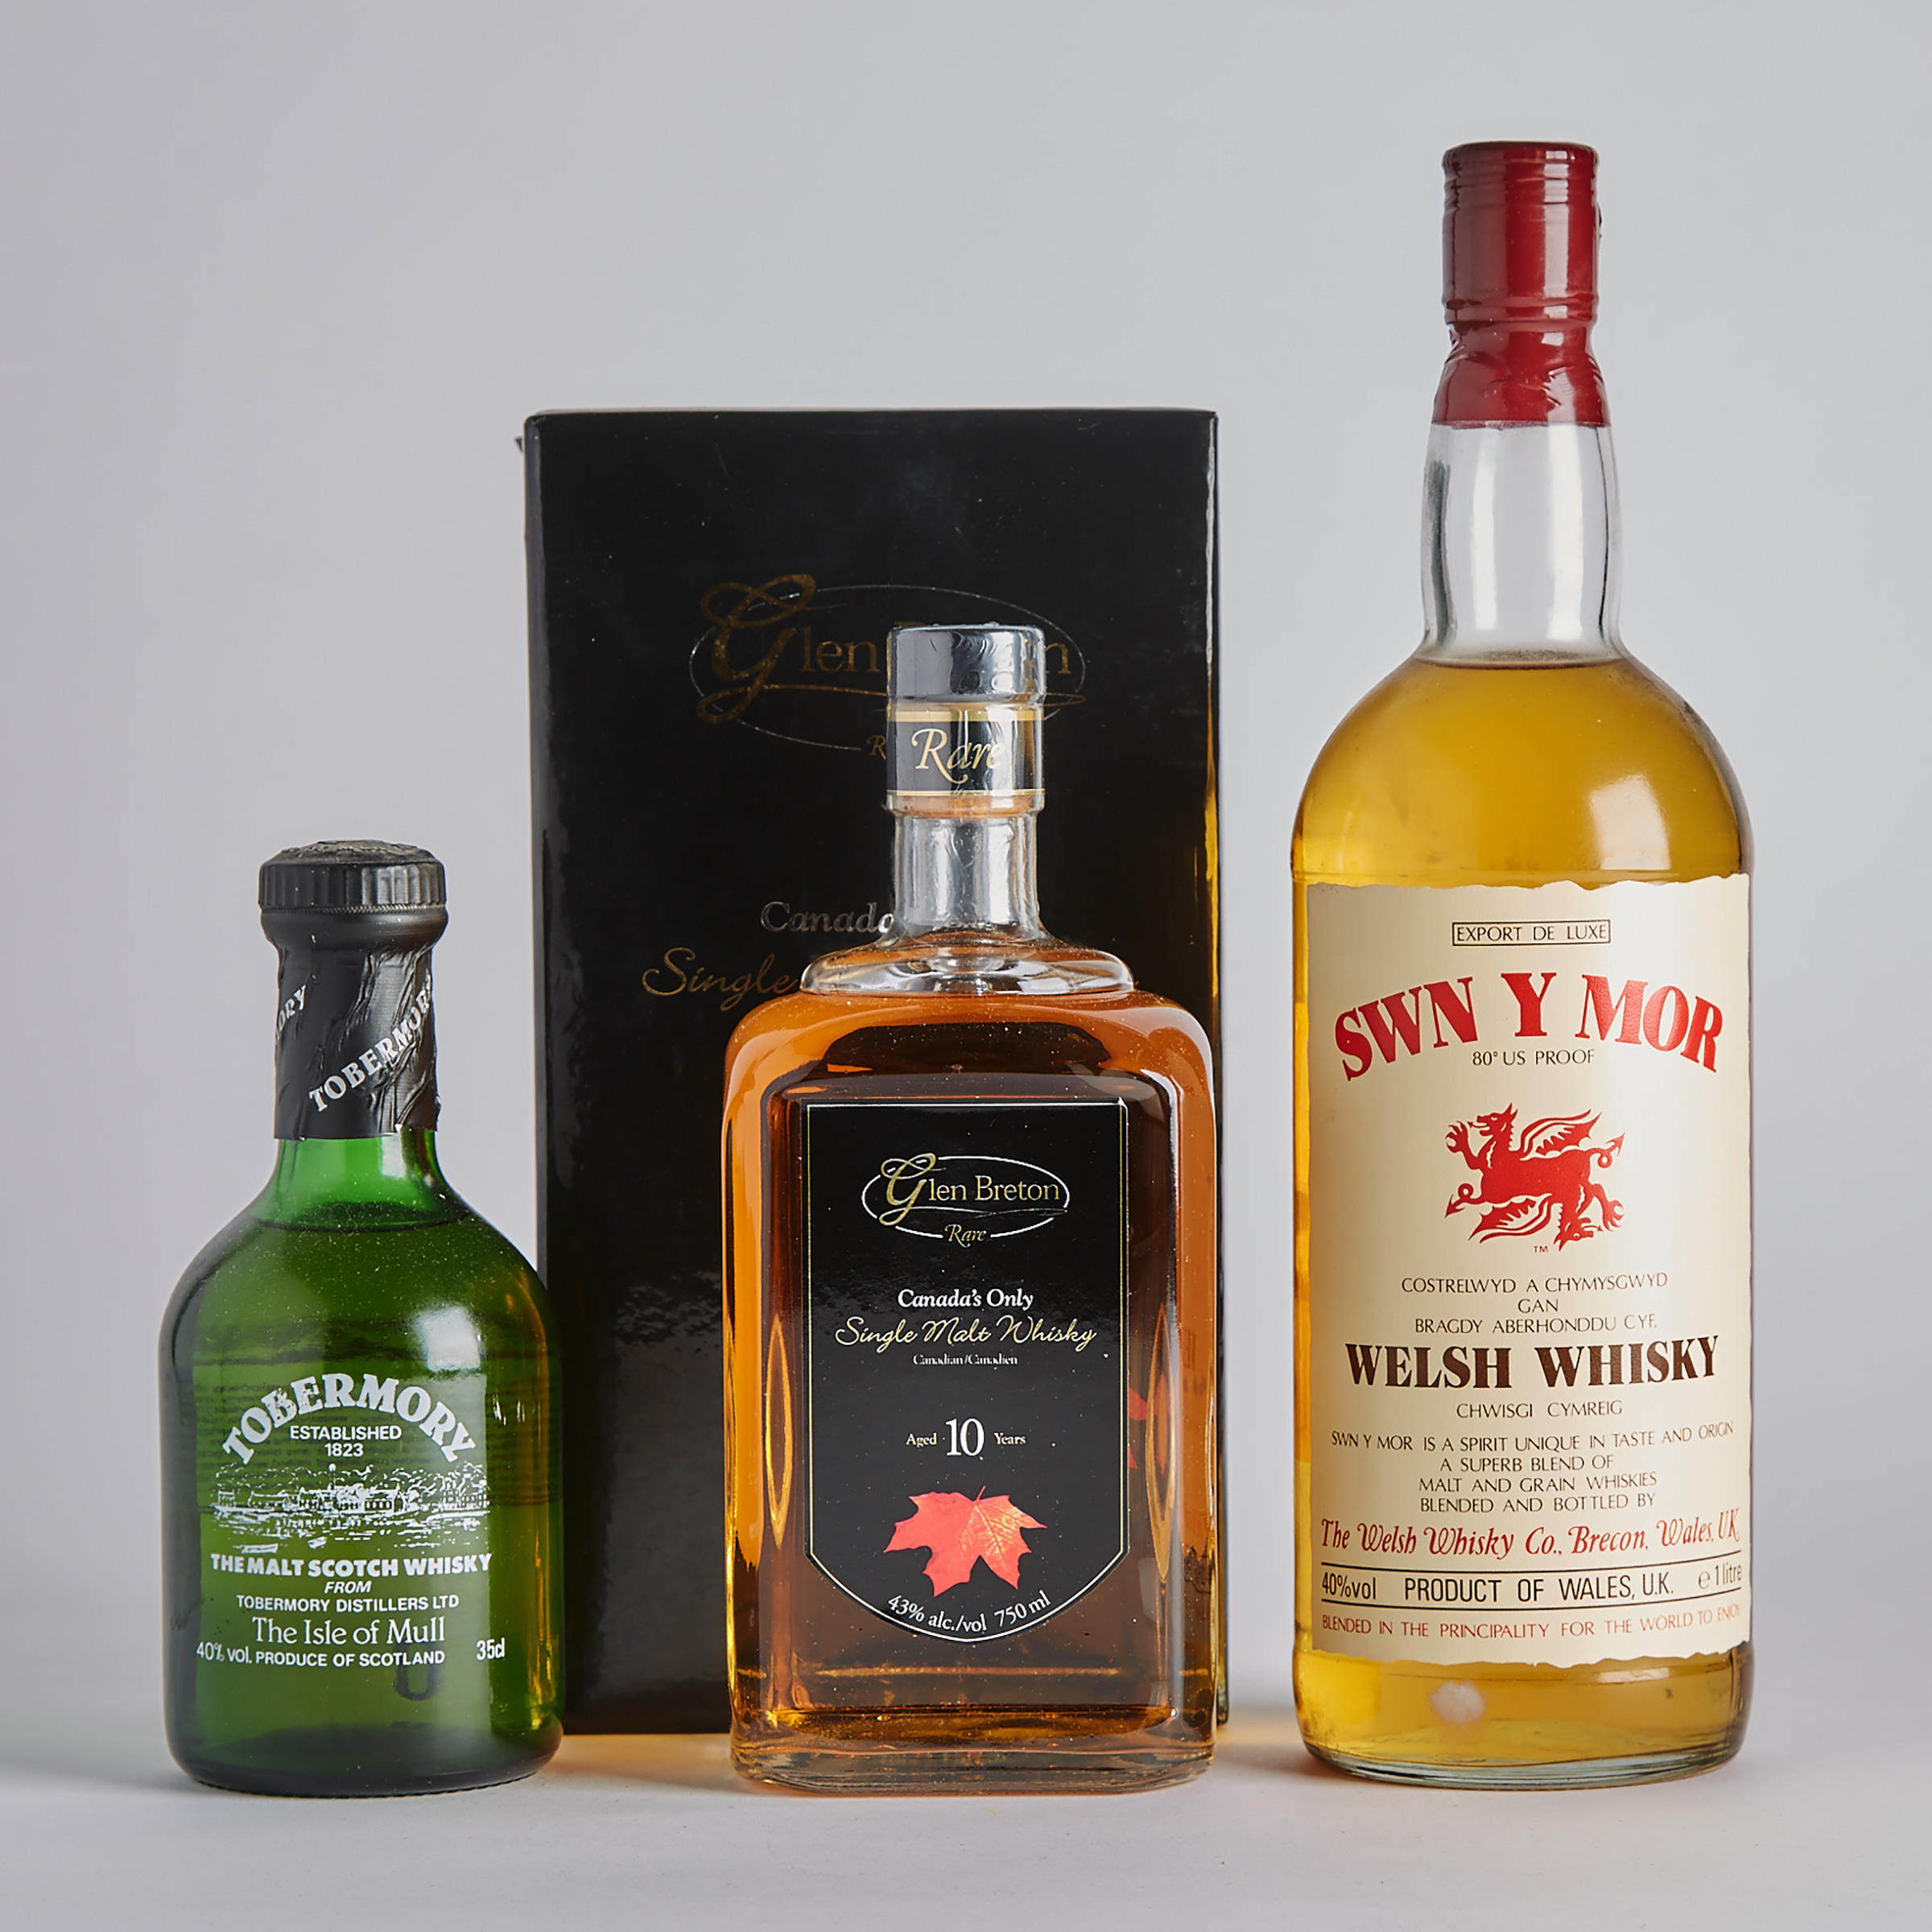 GLEN BRETON CANADIAN SINGLE MALT WHISKY 10 YEARS (ONE 750 ML)
SWN Y MOR (ONE 1000 ML)
TOBERMORY THE MALT SCOTCH WHISKY 10 YEARS (ONE 35 CL)